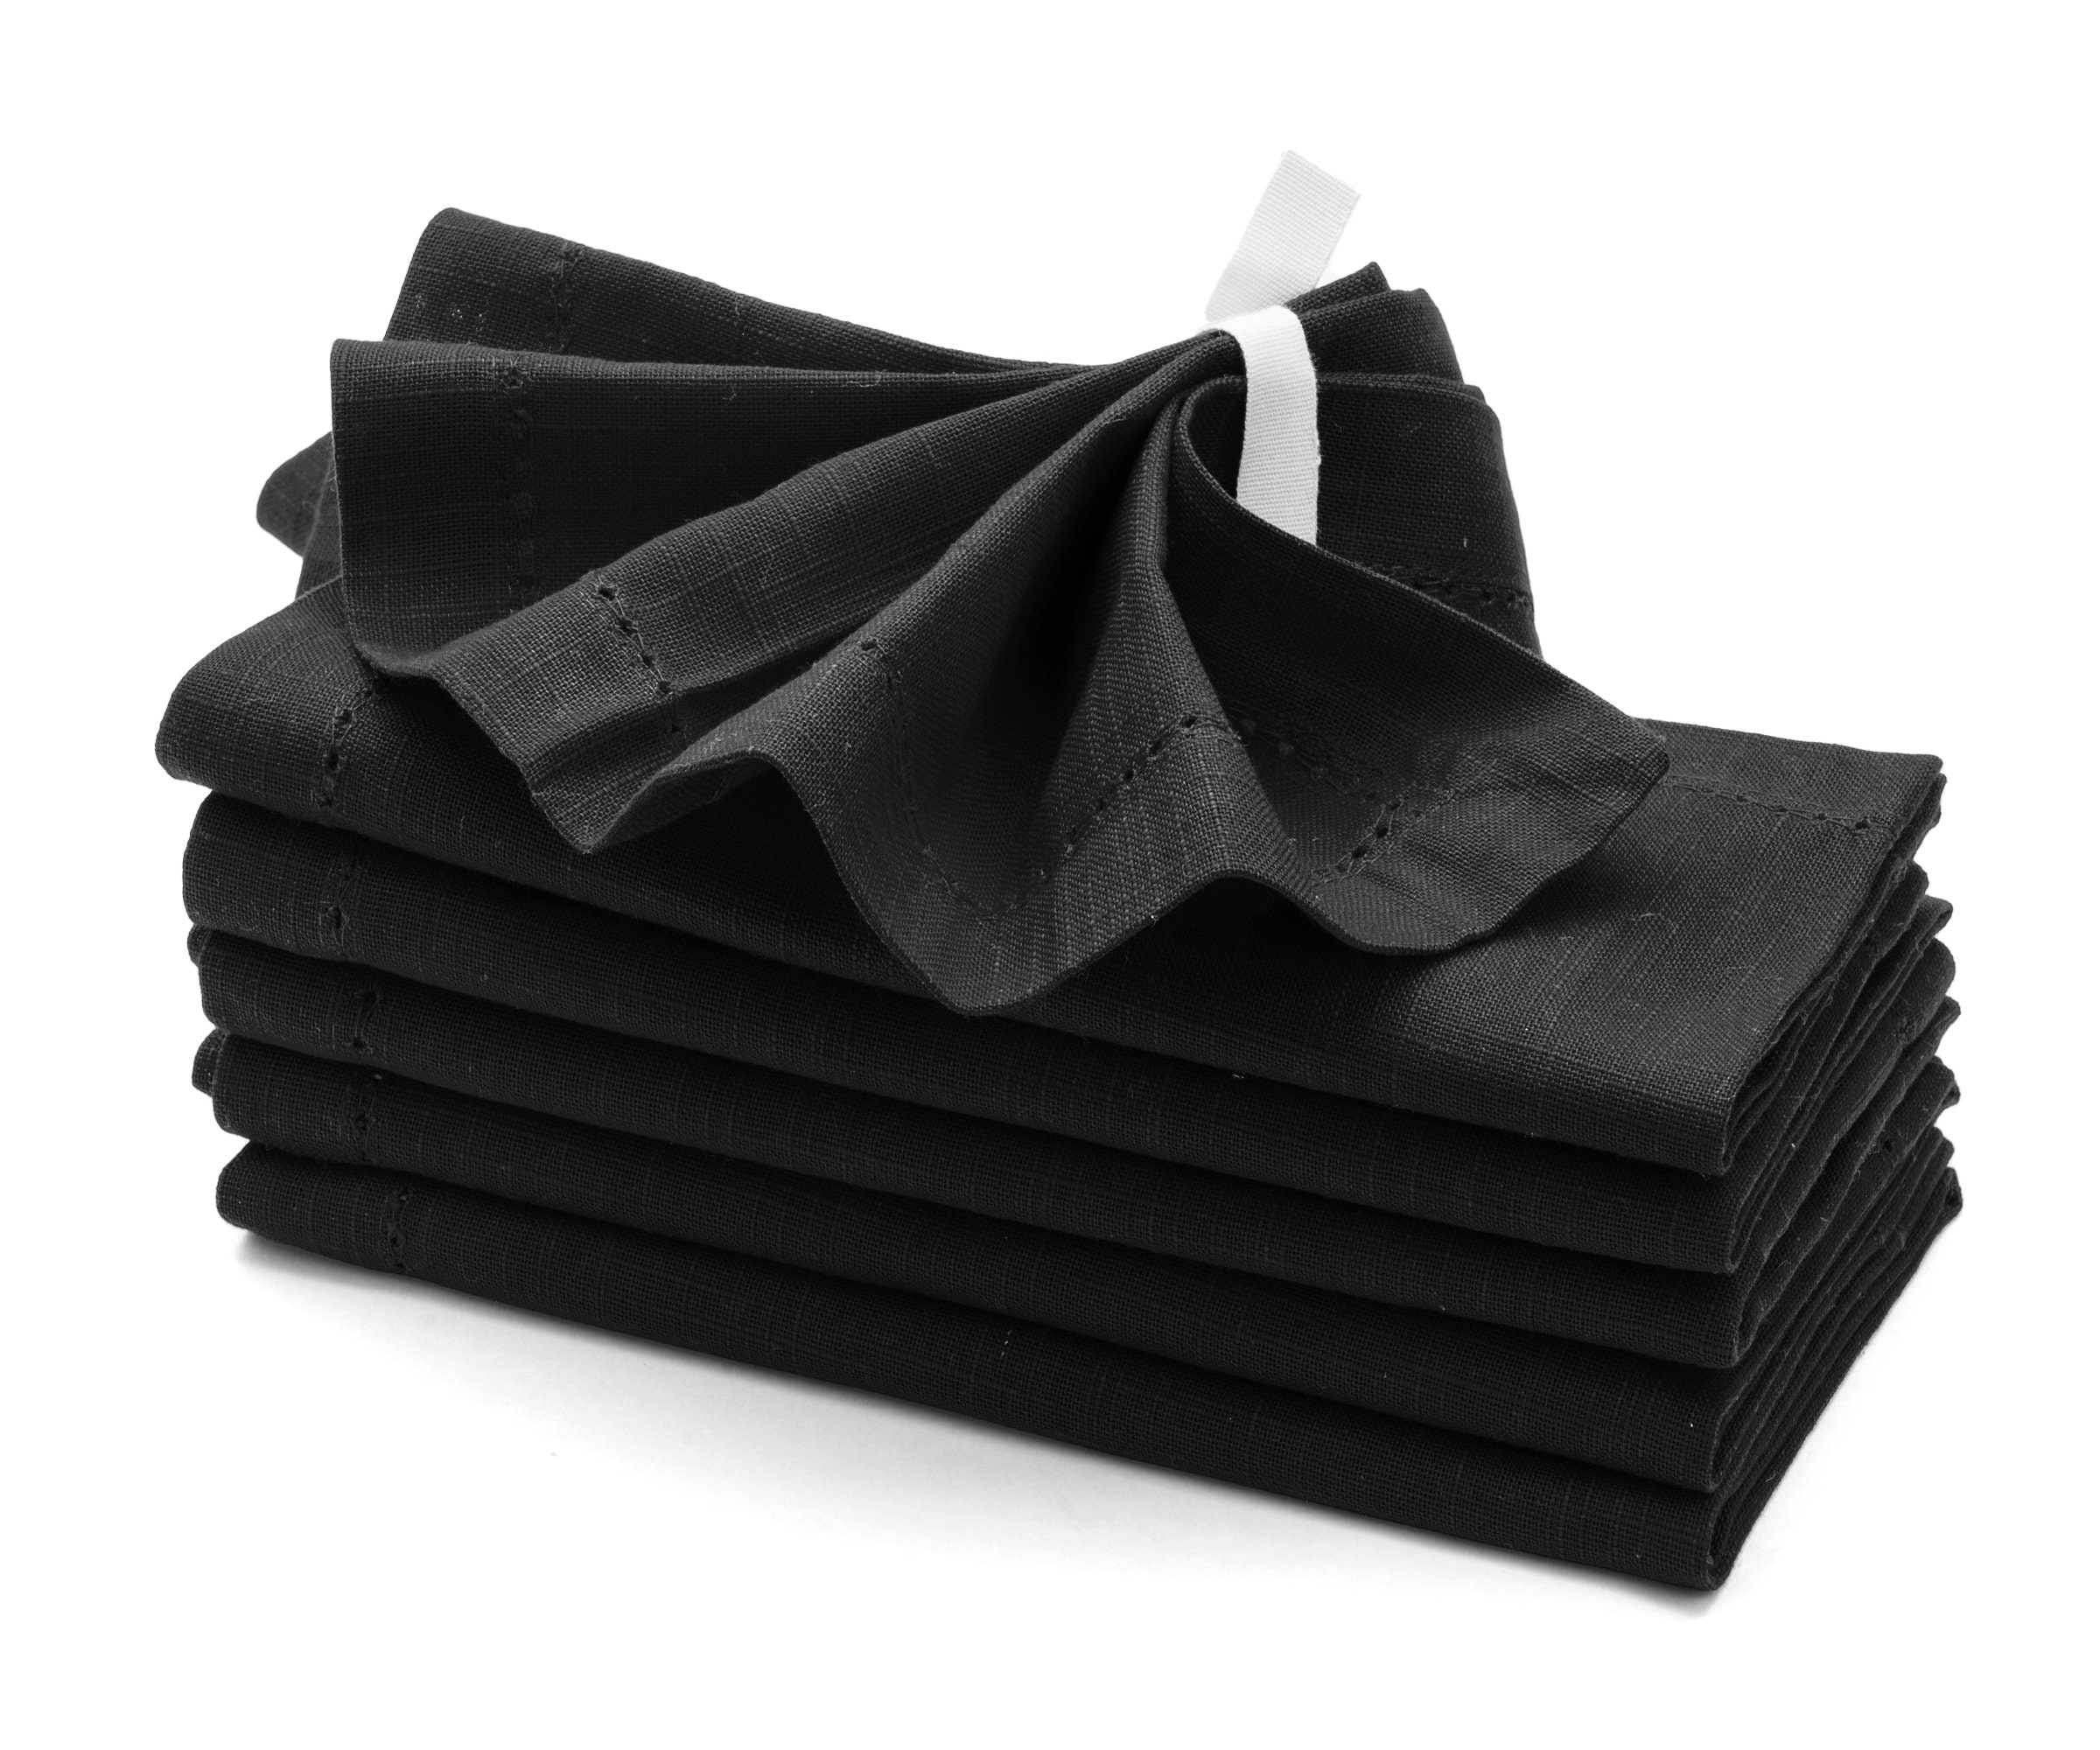  Pure 100% Black Linen Napkins - Cloth Napkins Set of 6 -  17x17-inch Linen Dinner Napkins Cloth Washable - Heavyweight Thick Natural  Fabric : Home & Kitchen